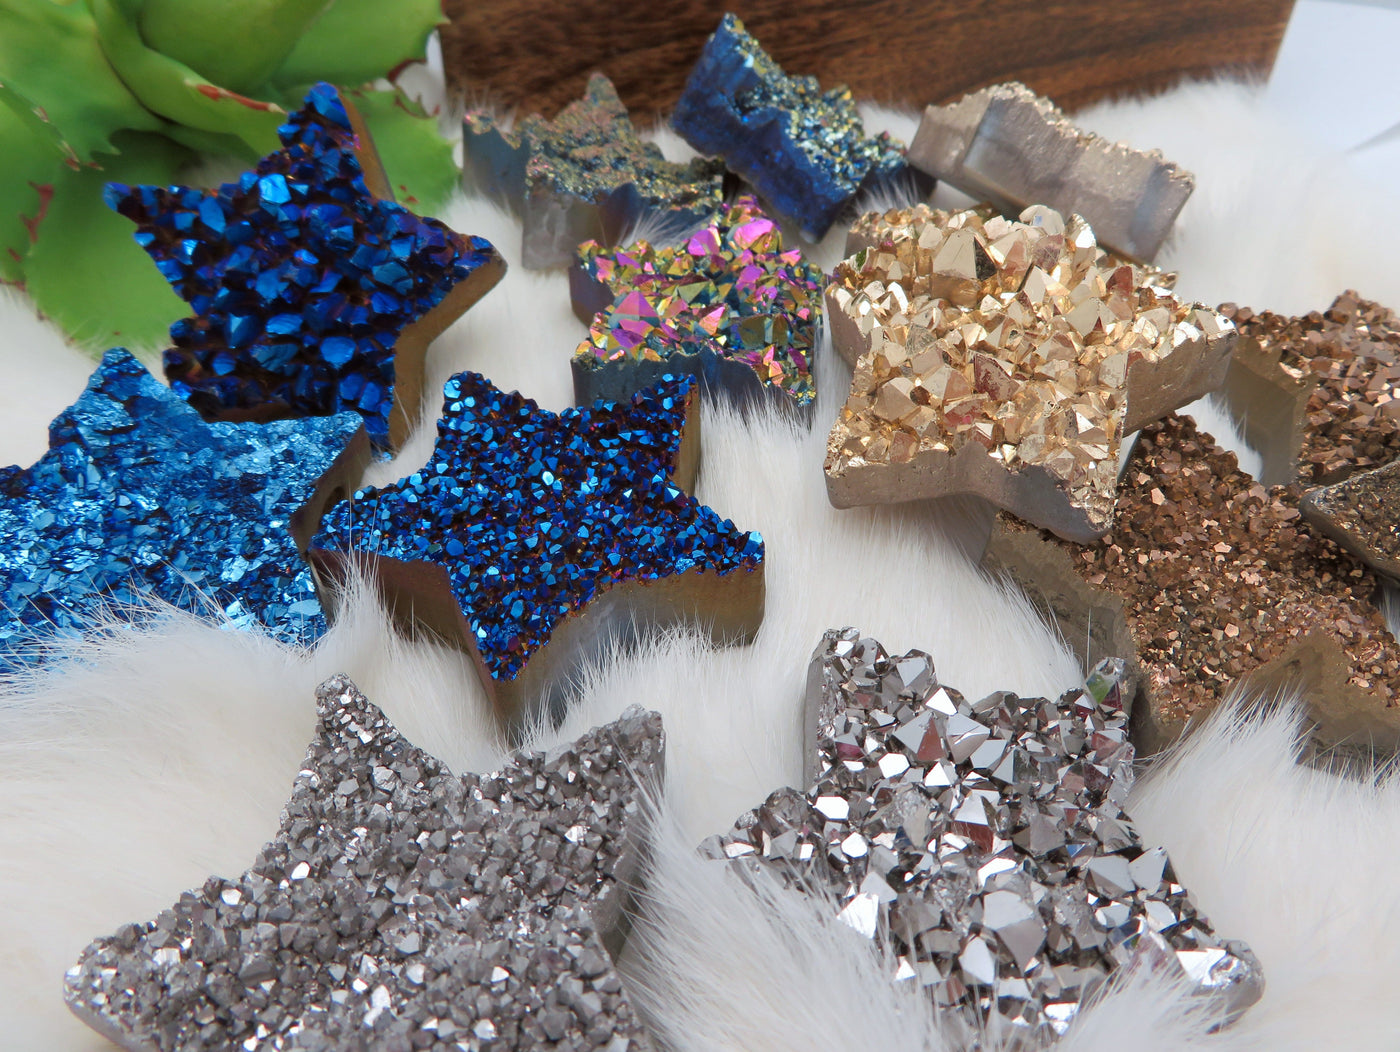 Up close view of Titanium Treated Druzy Stars displayed on fuzzy white surface.